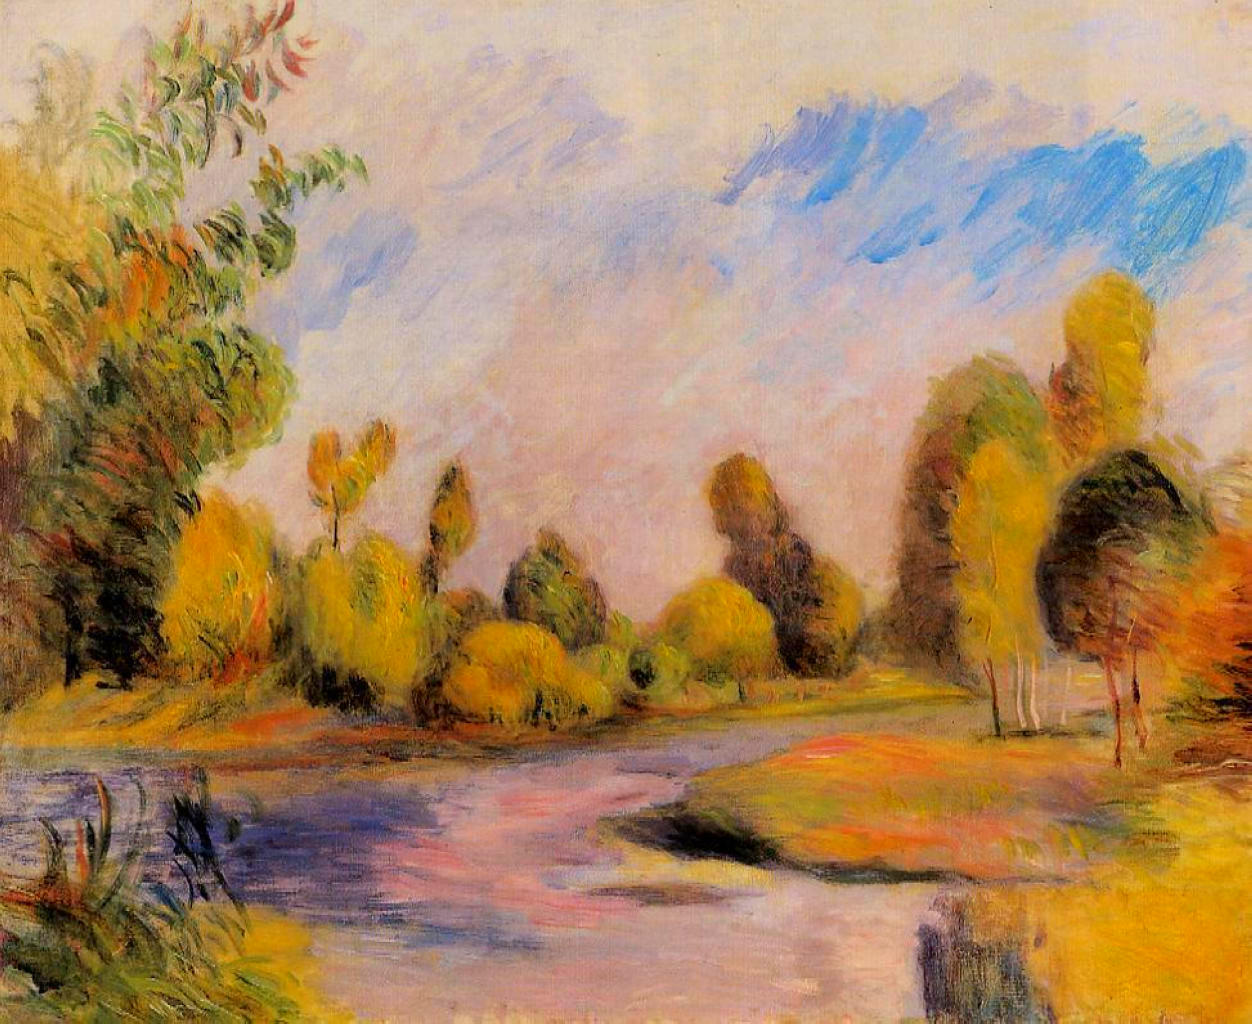 Banks of a river 1896